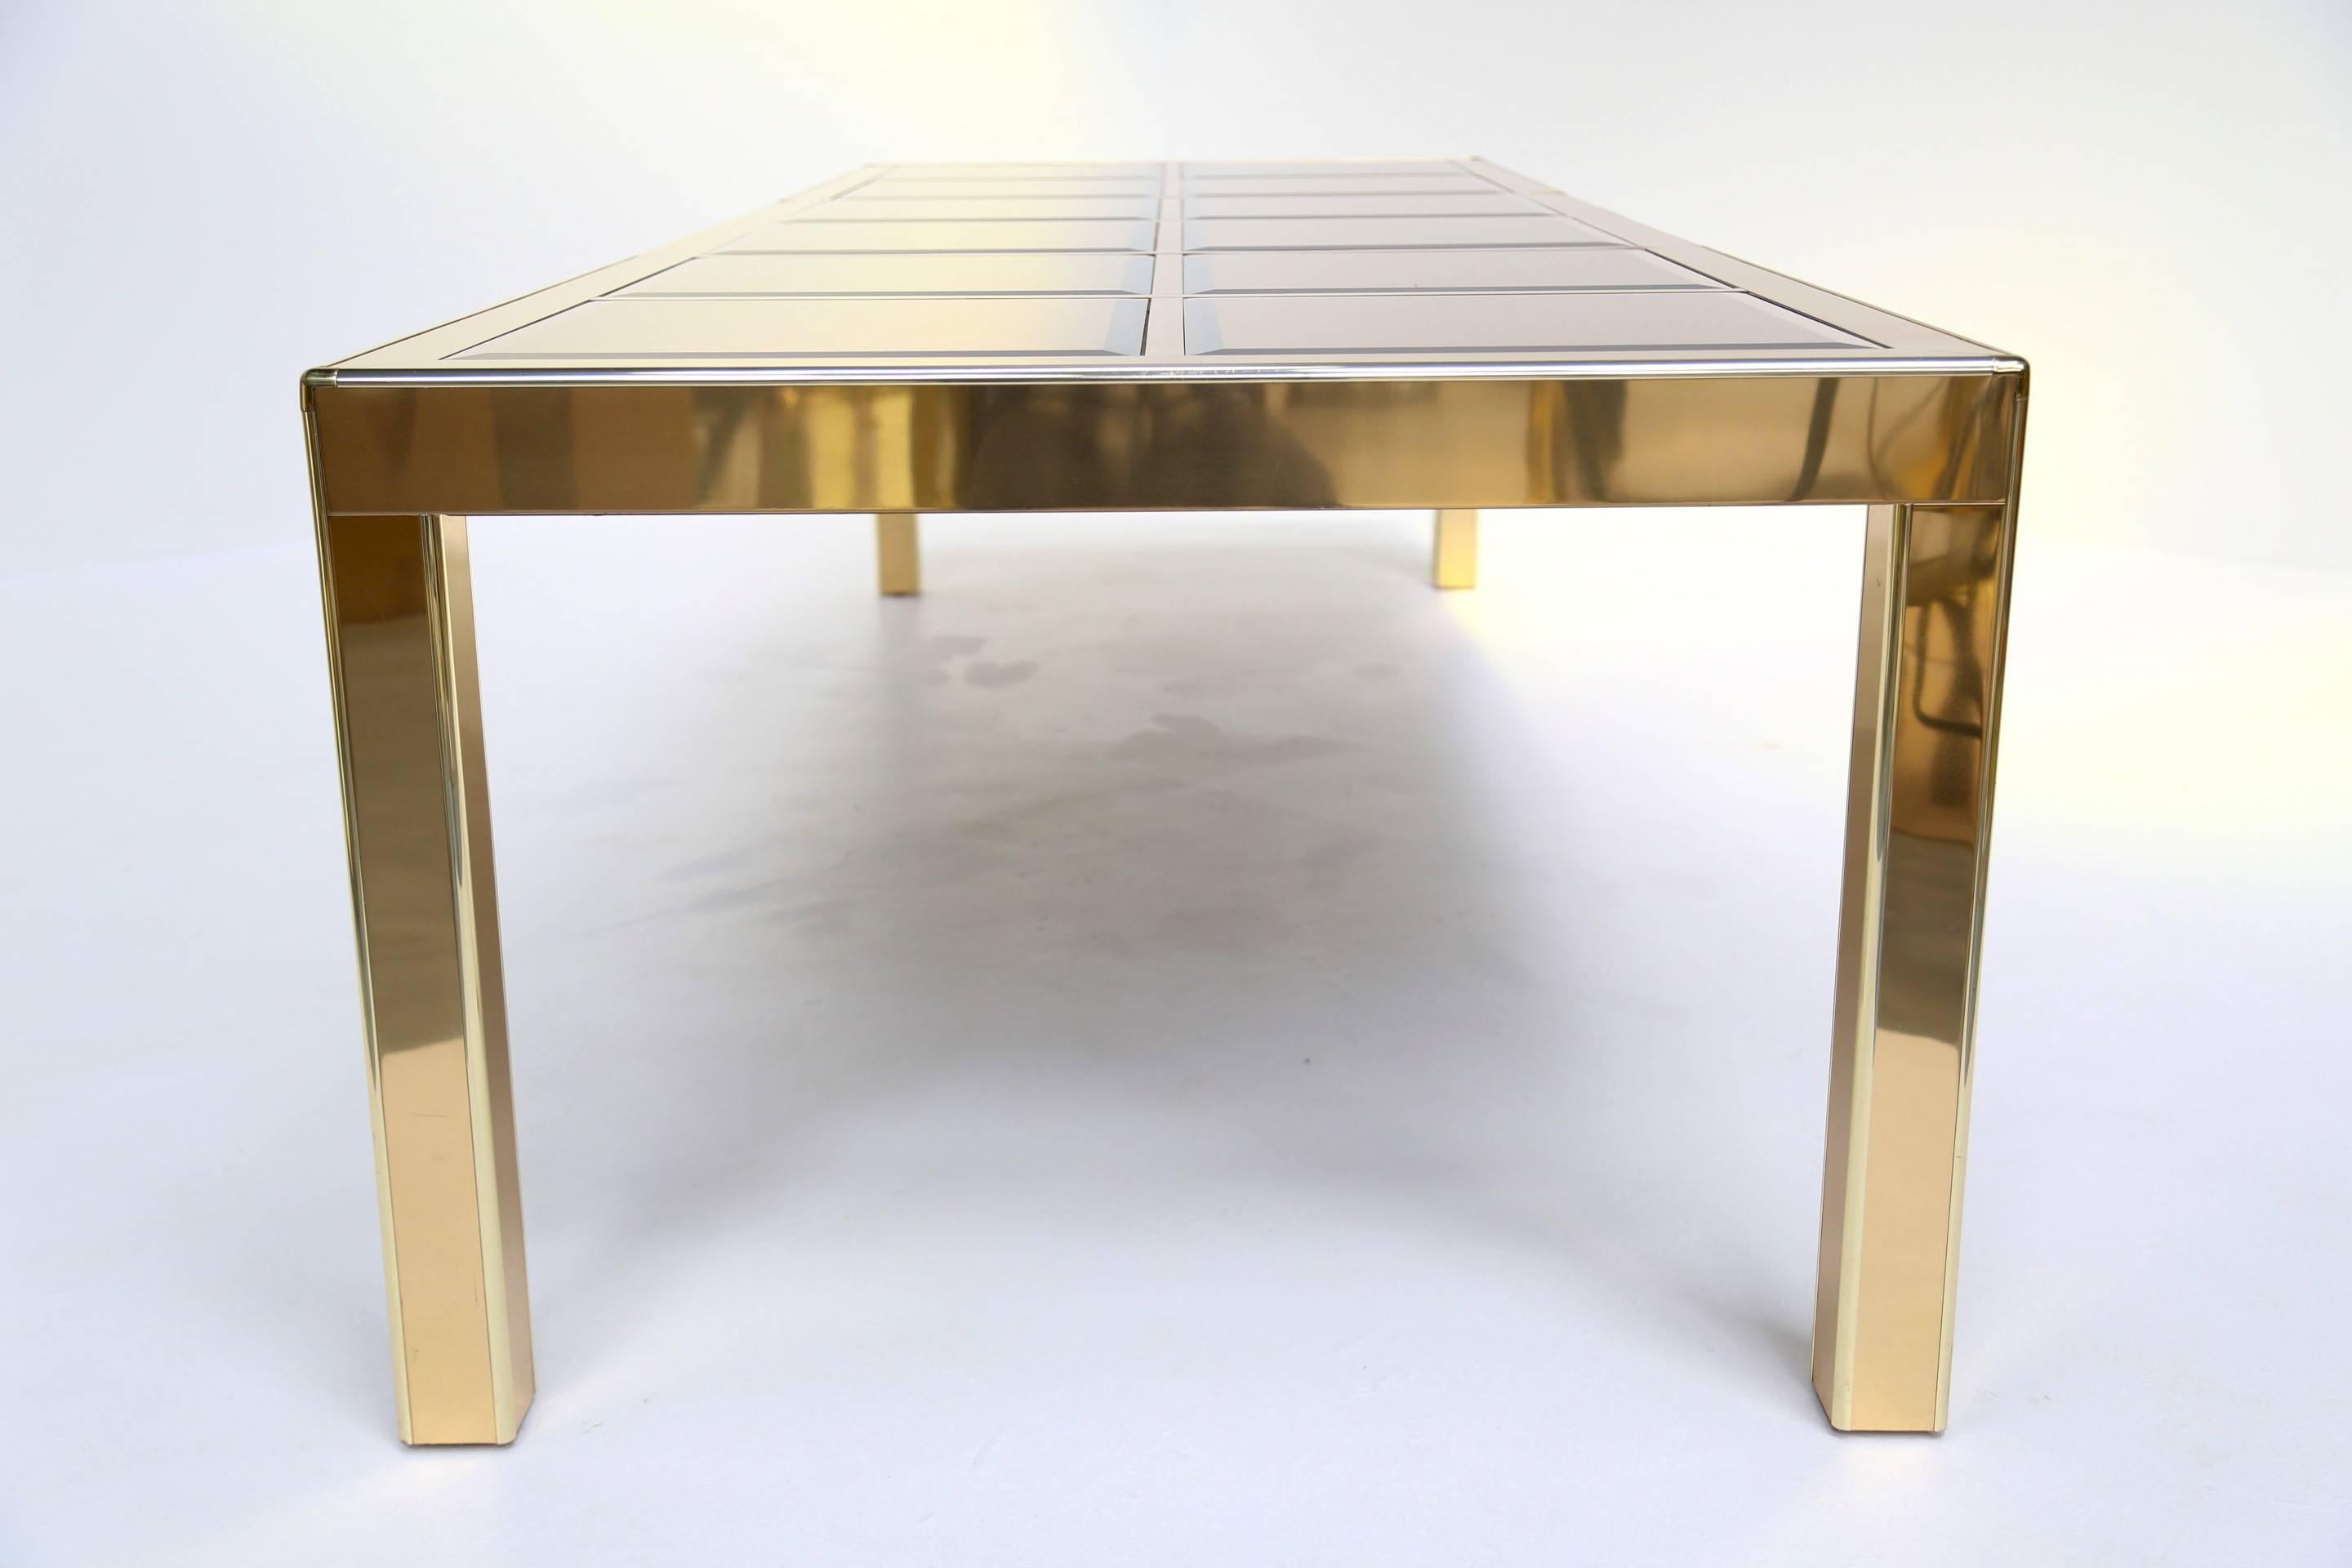 American Mastercraft brass extending dining table with mirrored glass panels.